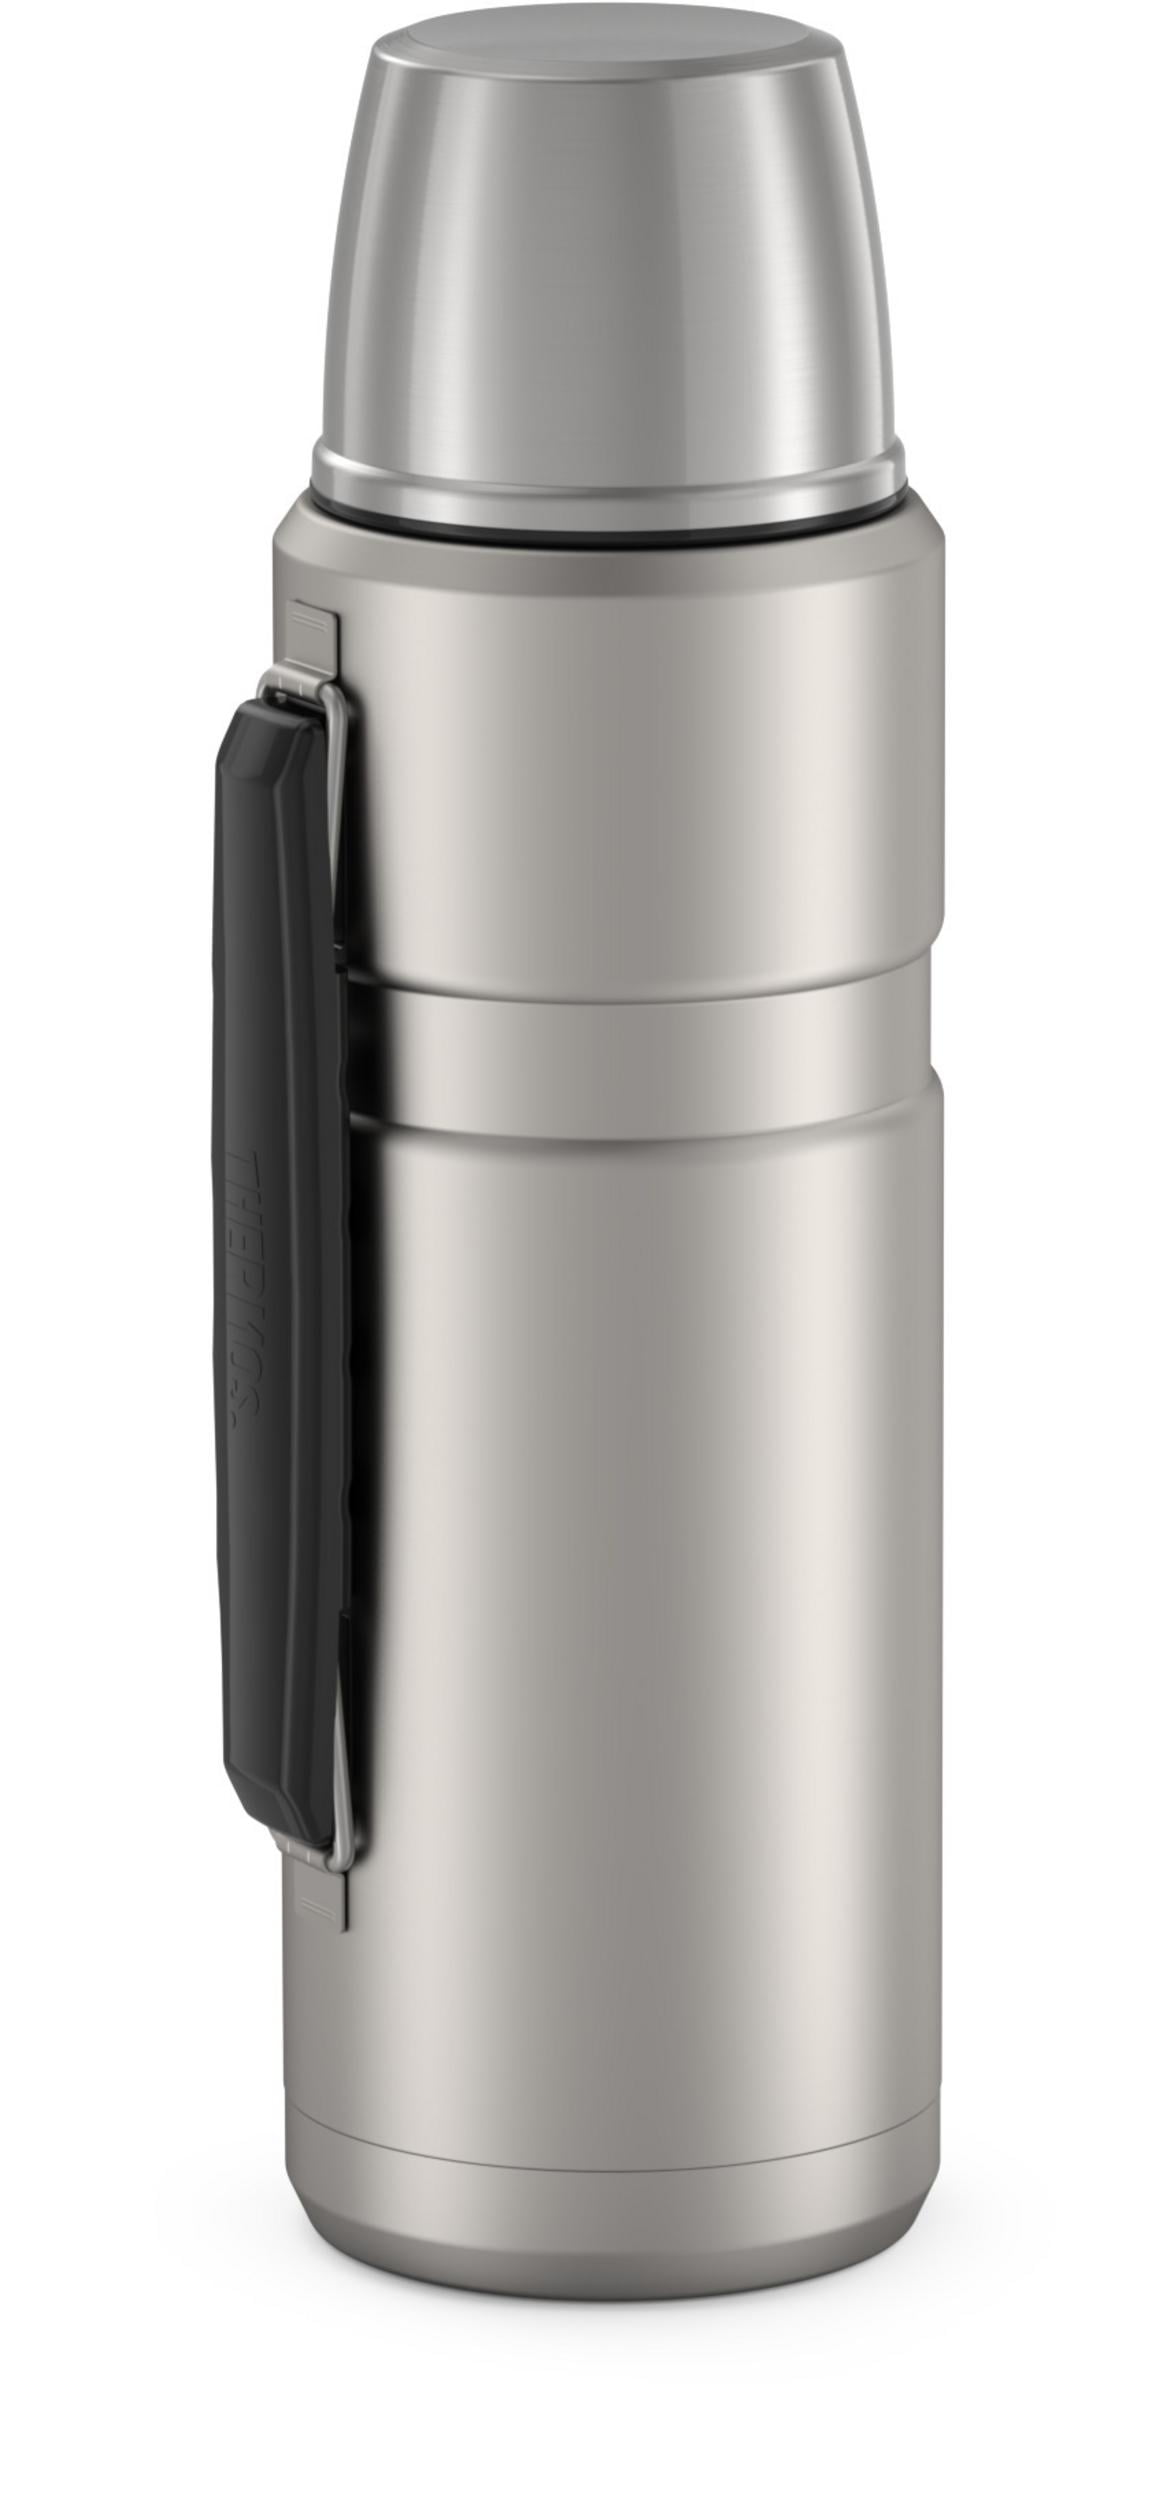 Thermos Stainless King Vacuum-Insulation Beverage Bottle, 2 Liters, Silver  